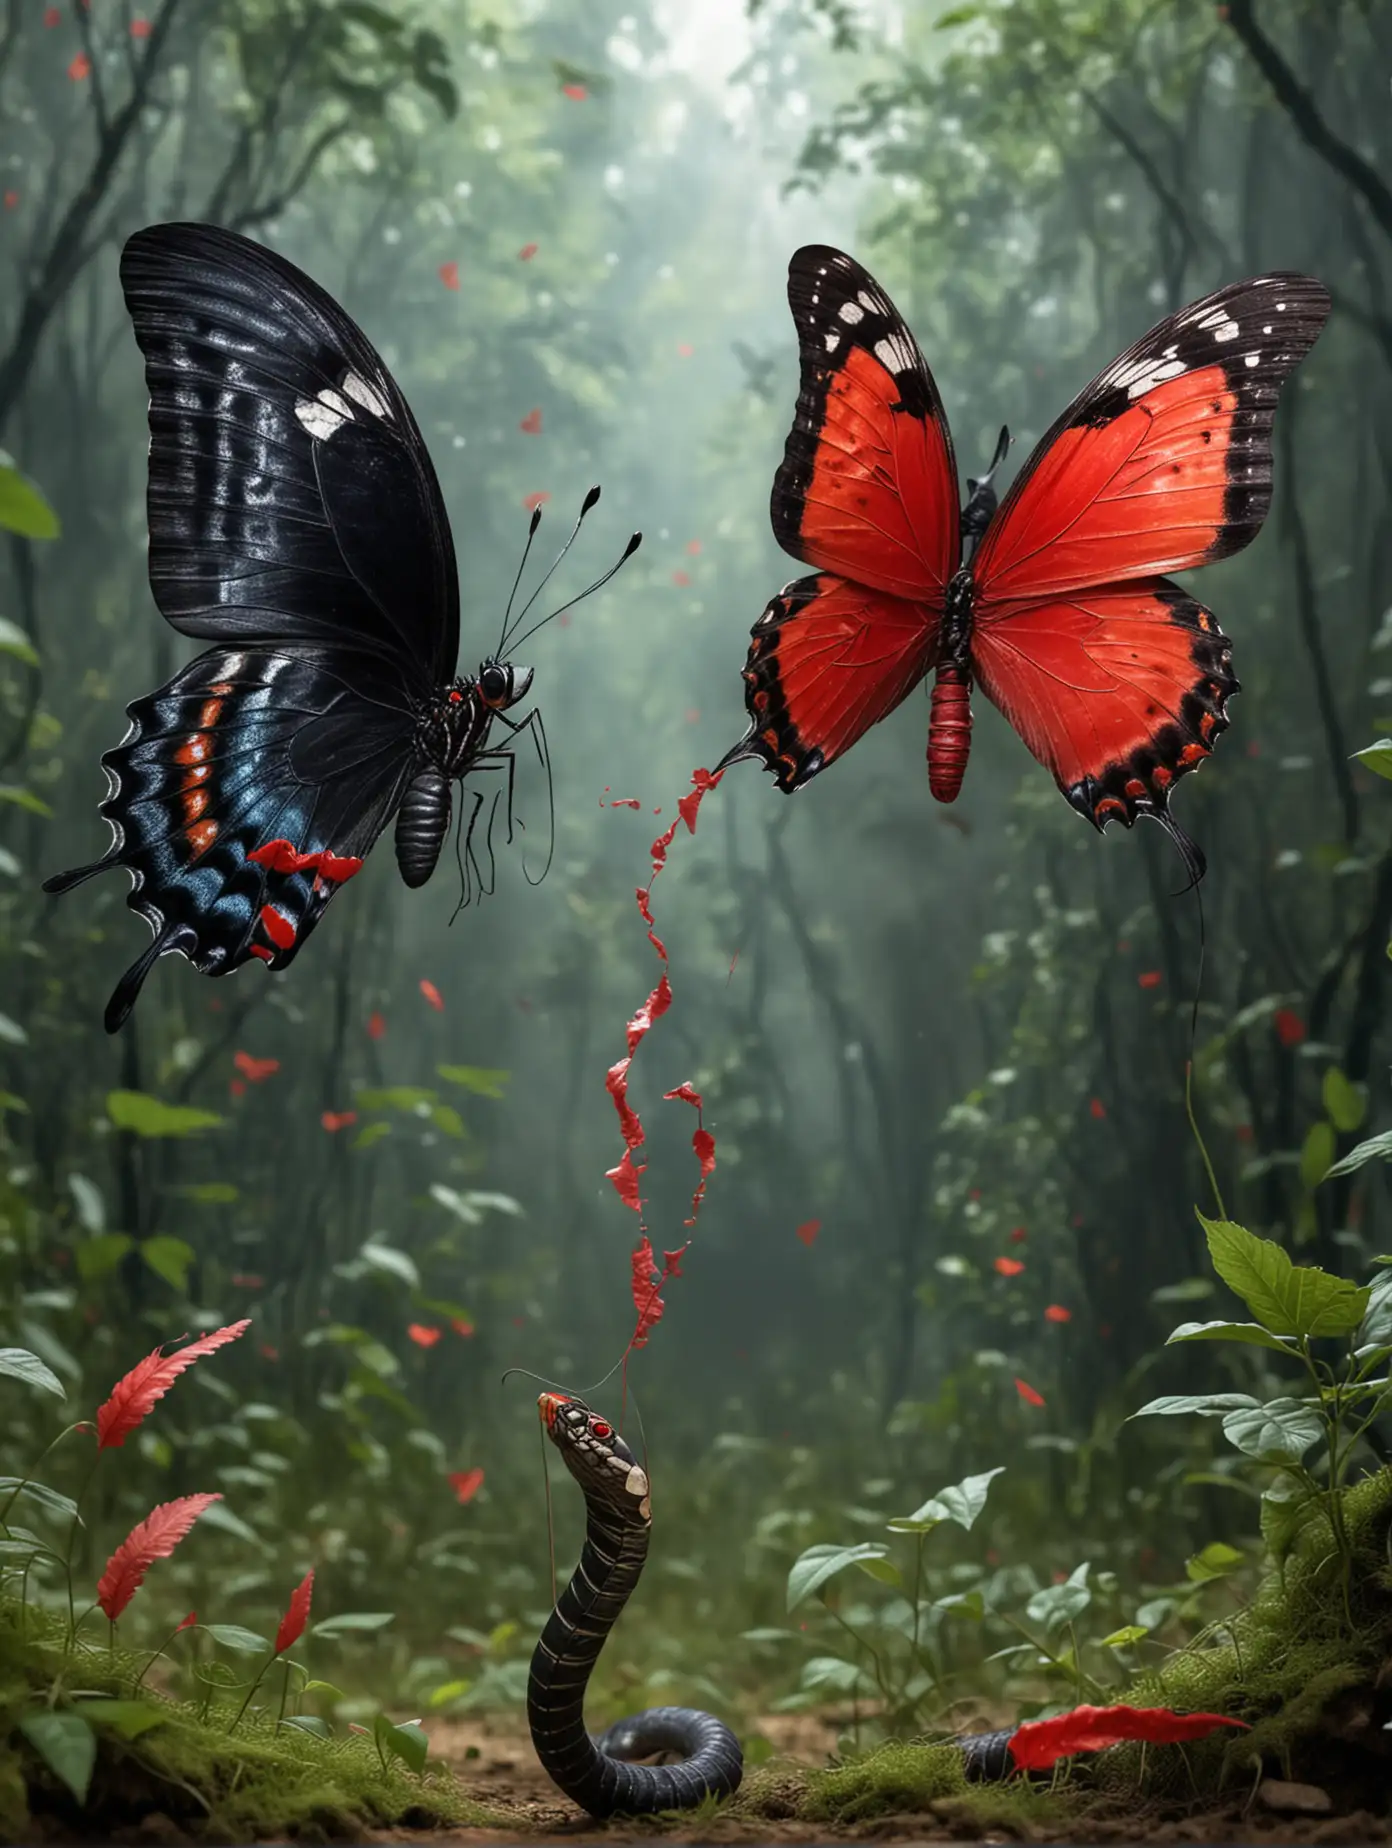 Magical-Black-and-Red-Butterflies-Dancing-Around-Hissing-Cobra